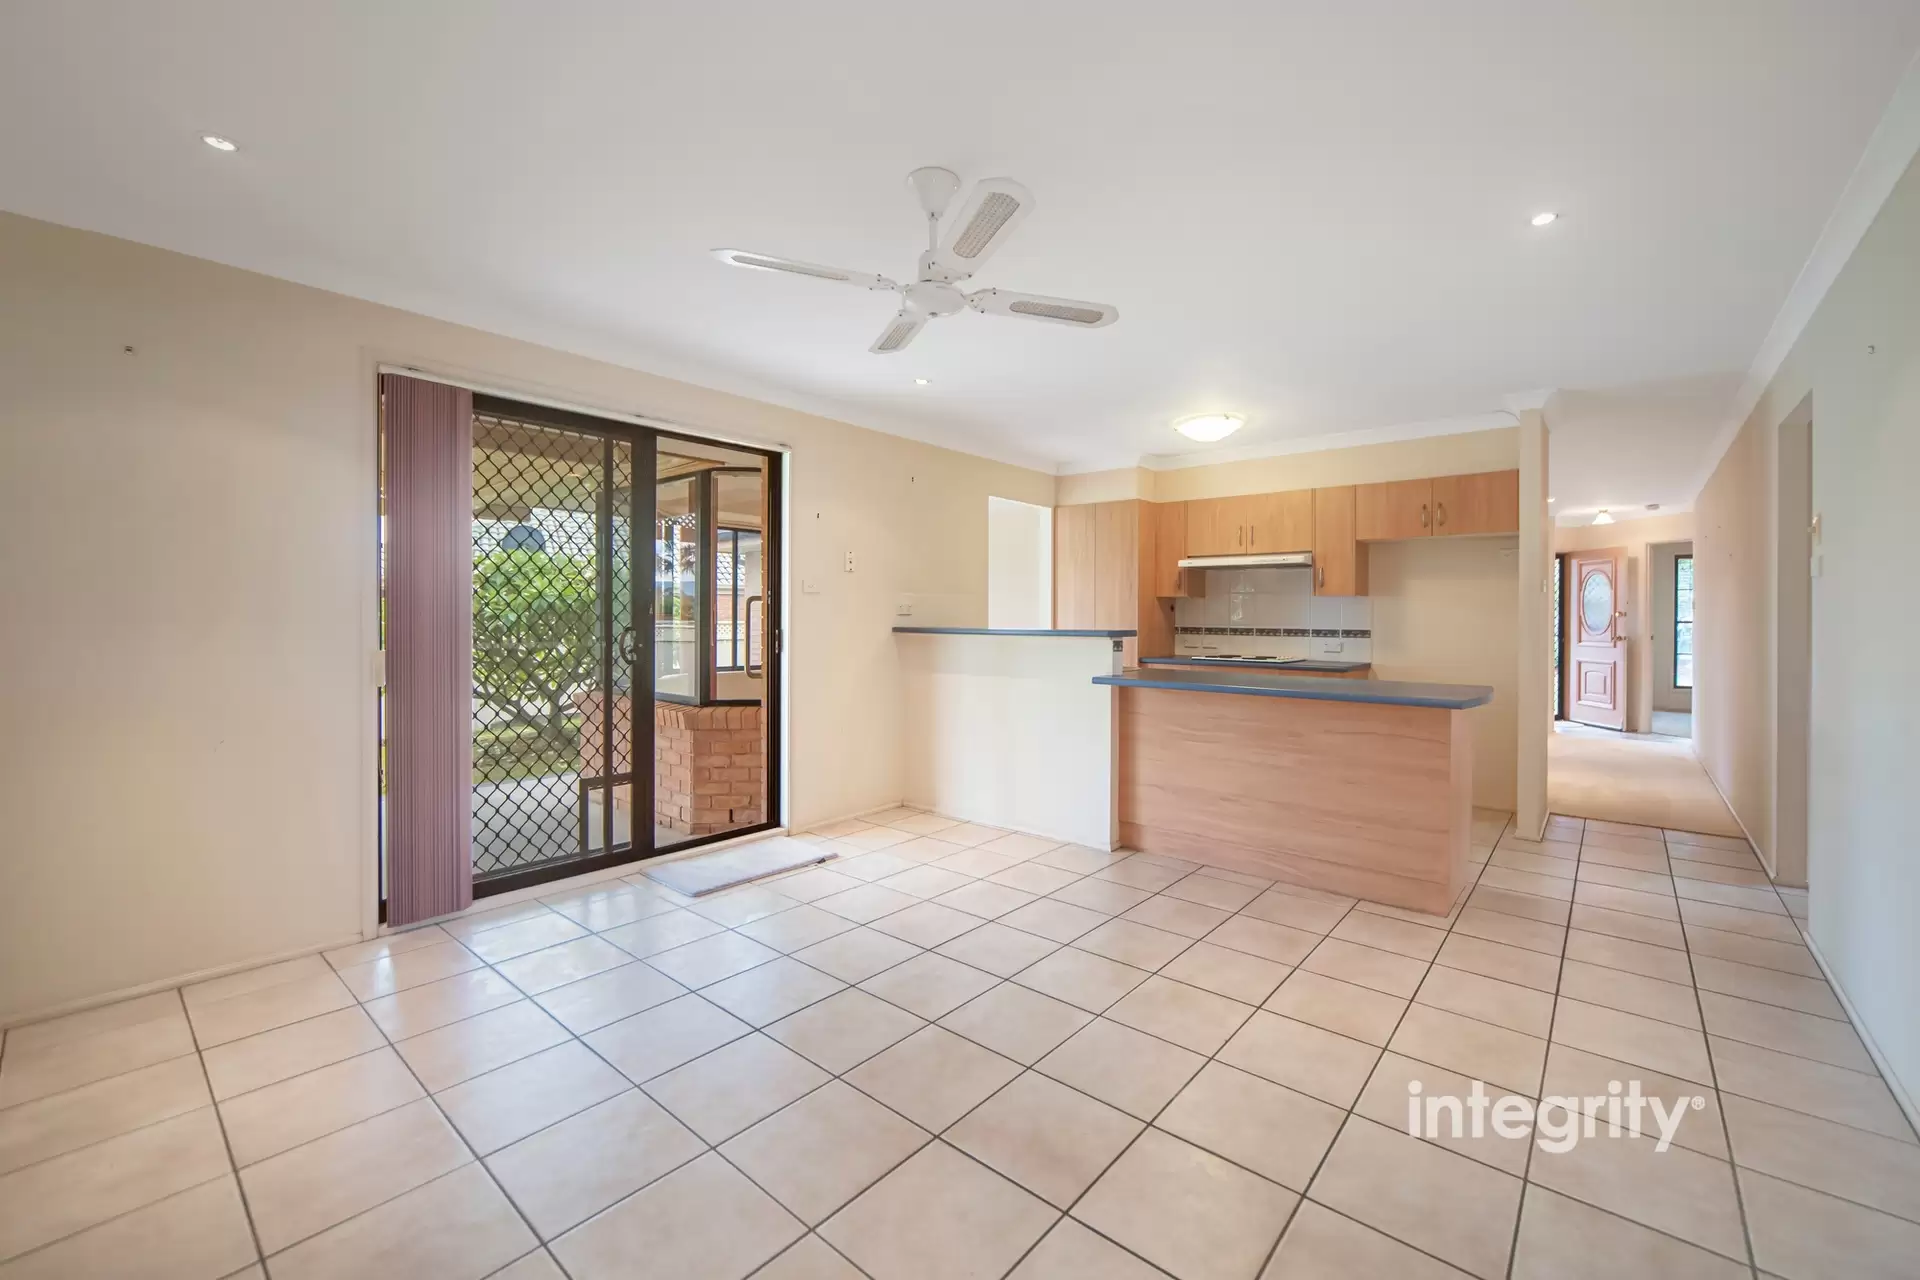 22 Robinia Way, Worrigee For Sale by Integrity Real Estate - image 3